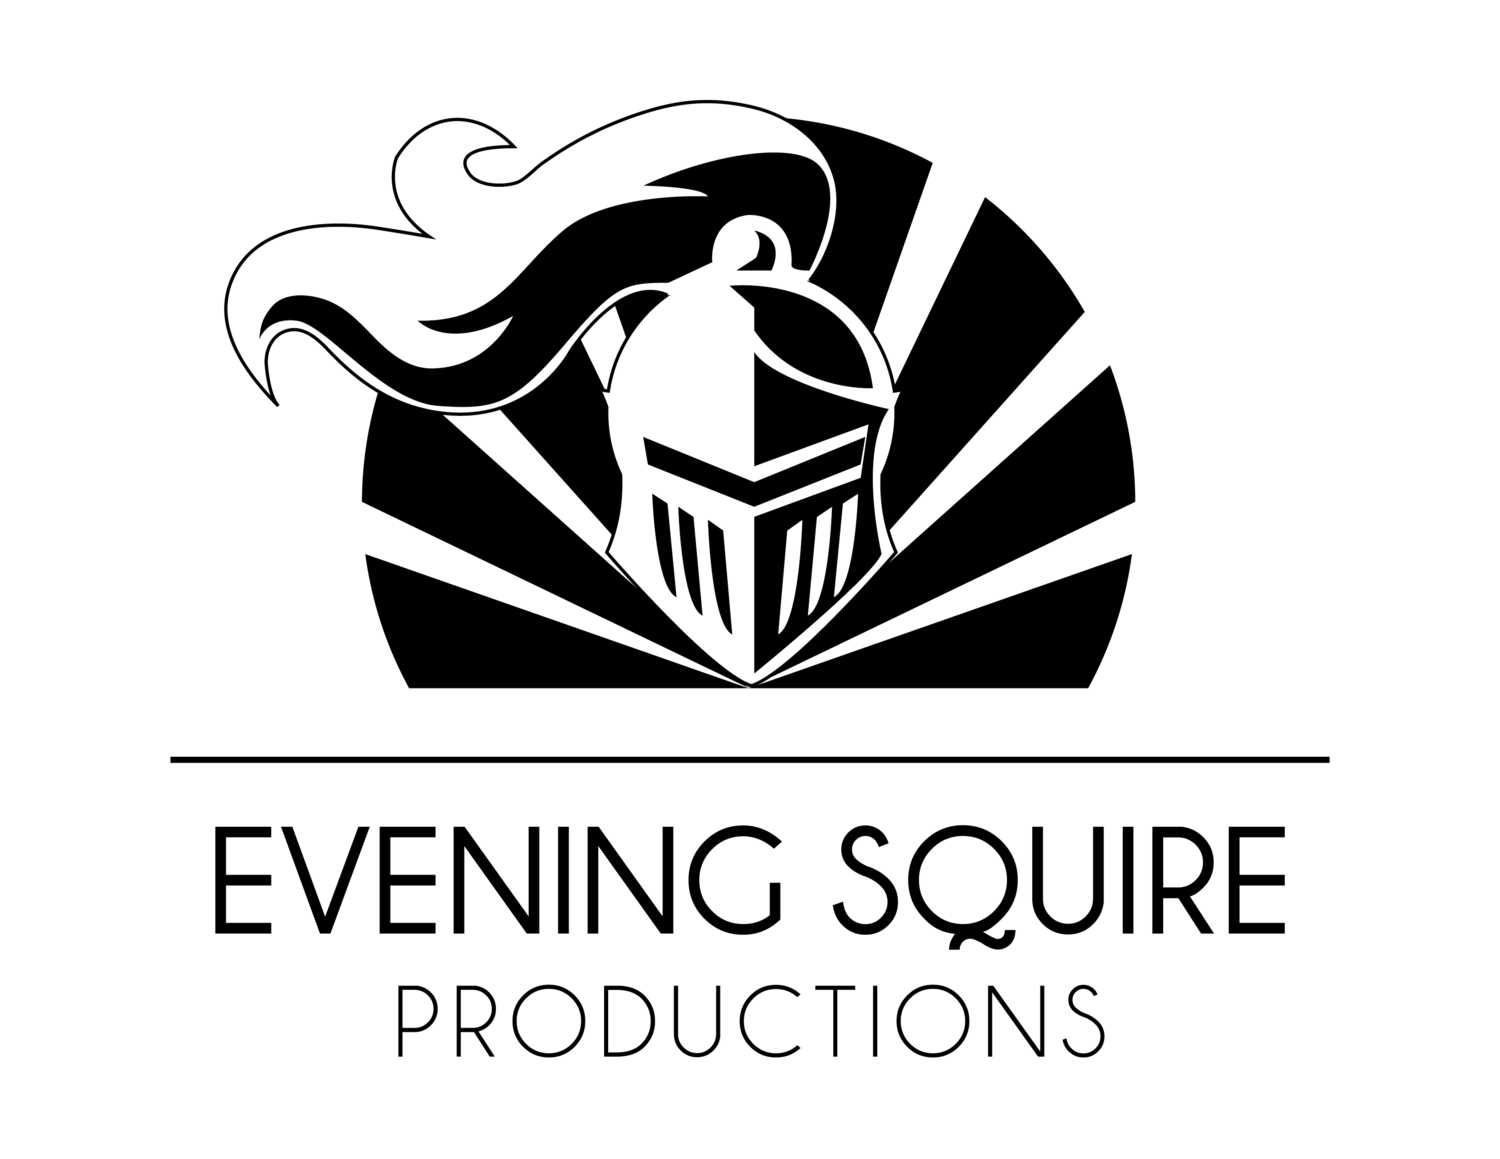 Evening Squire Productions